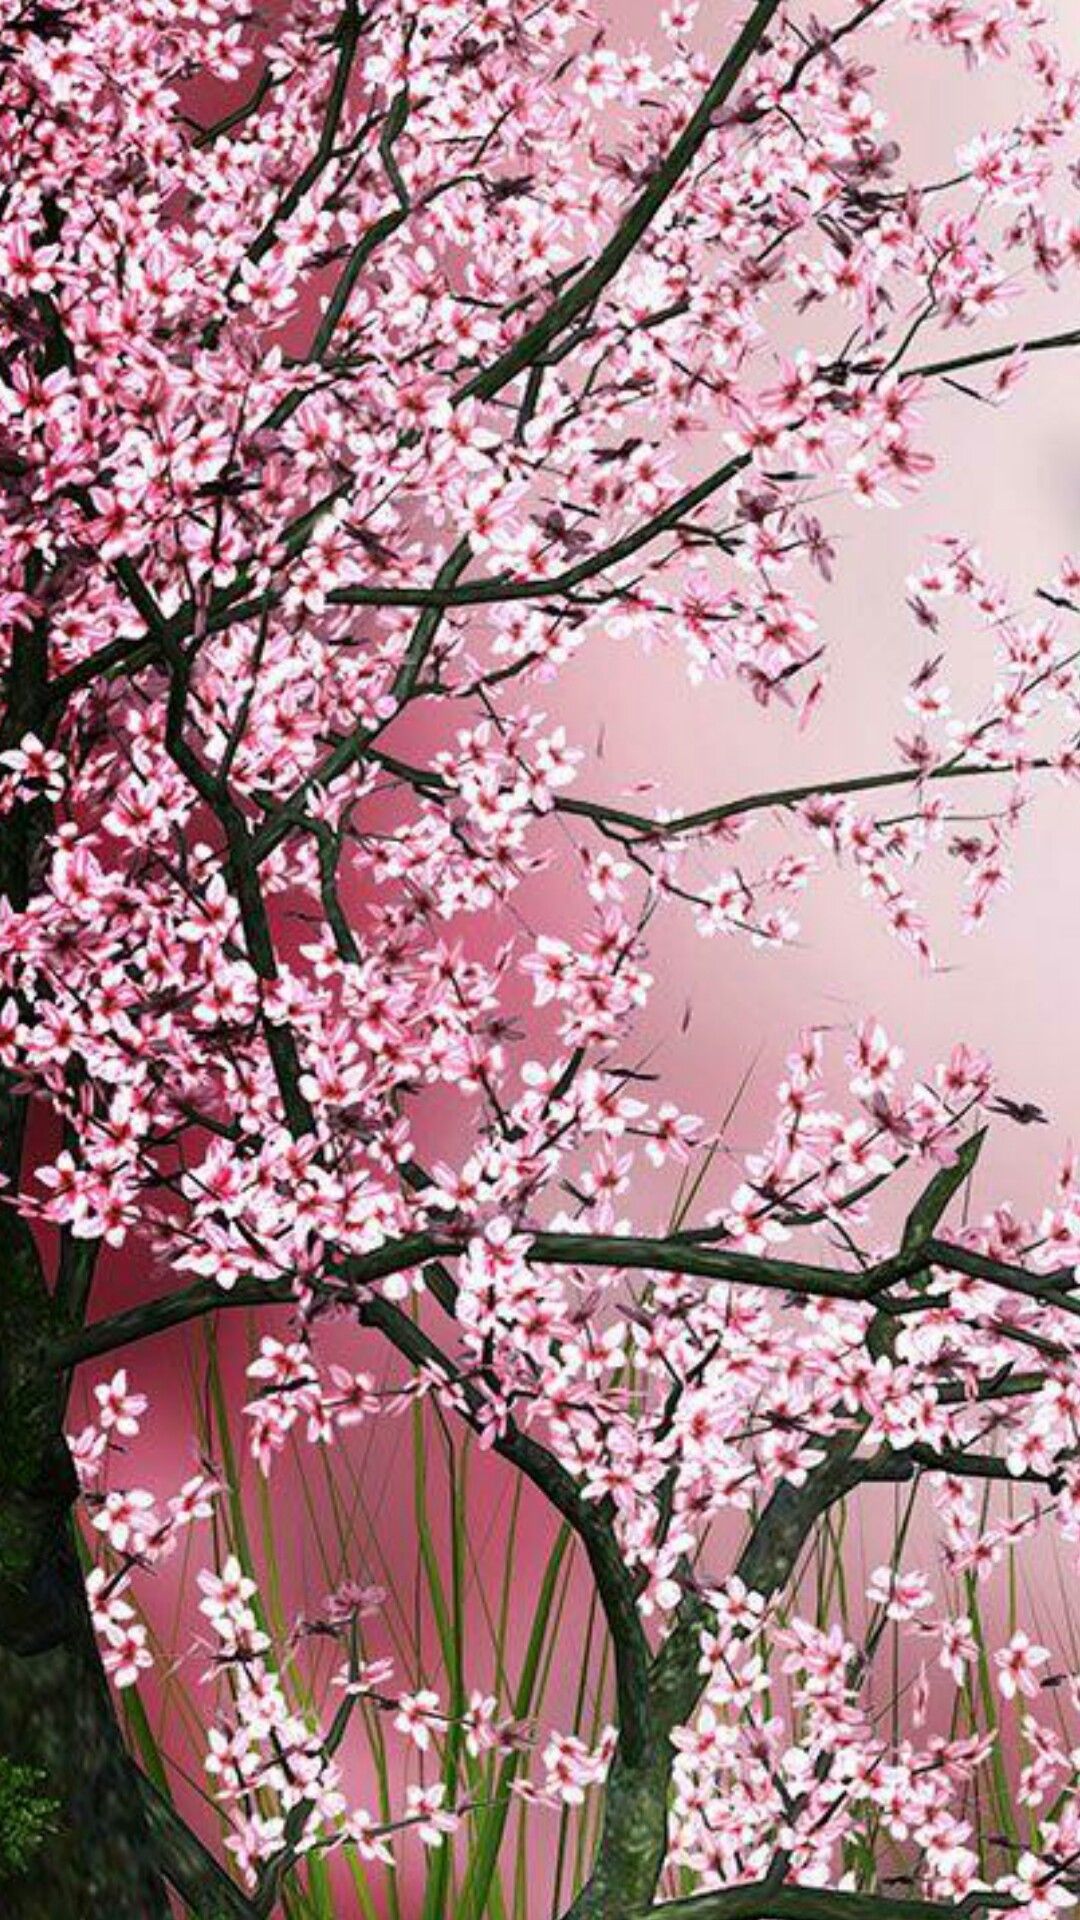 A pink tree with white flowers in the background - Cherry blossom